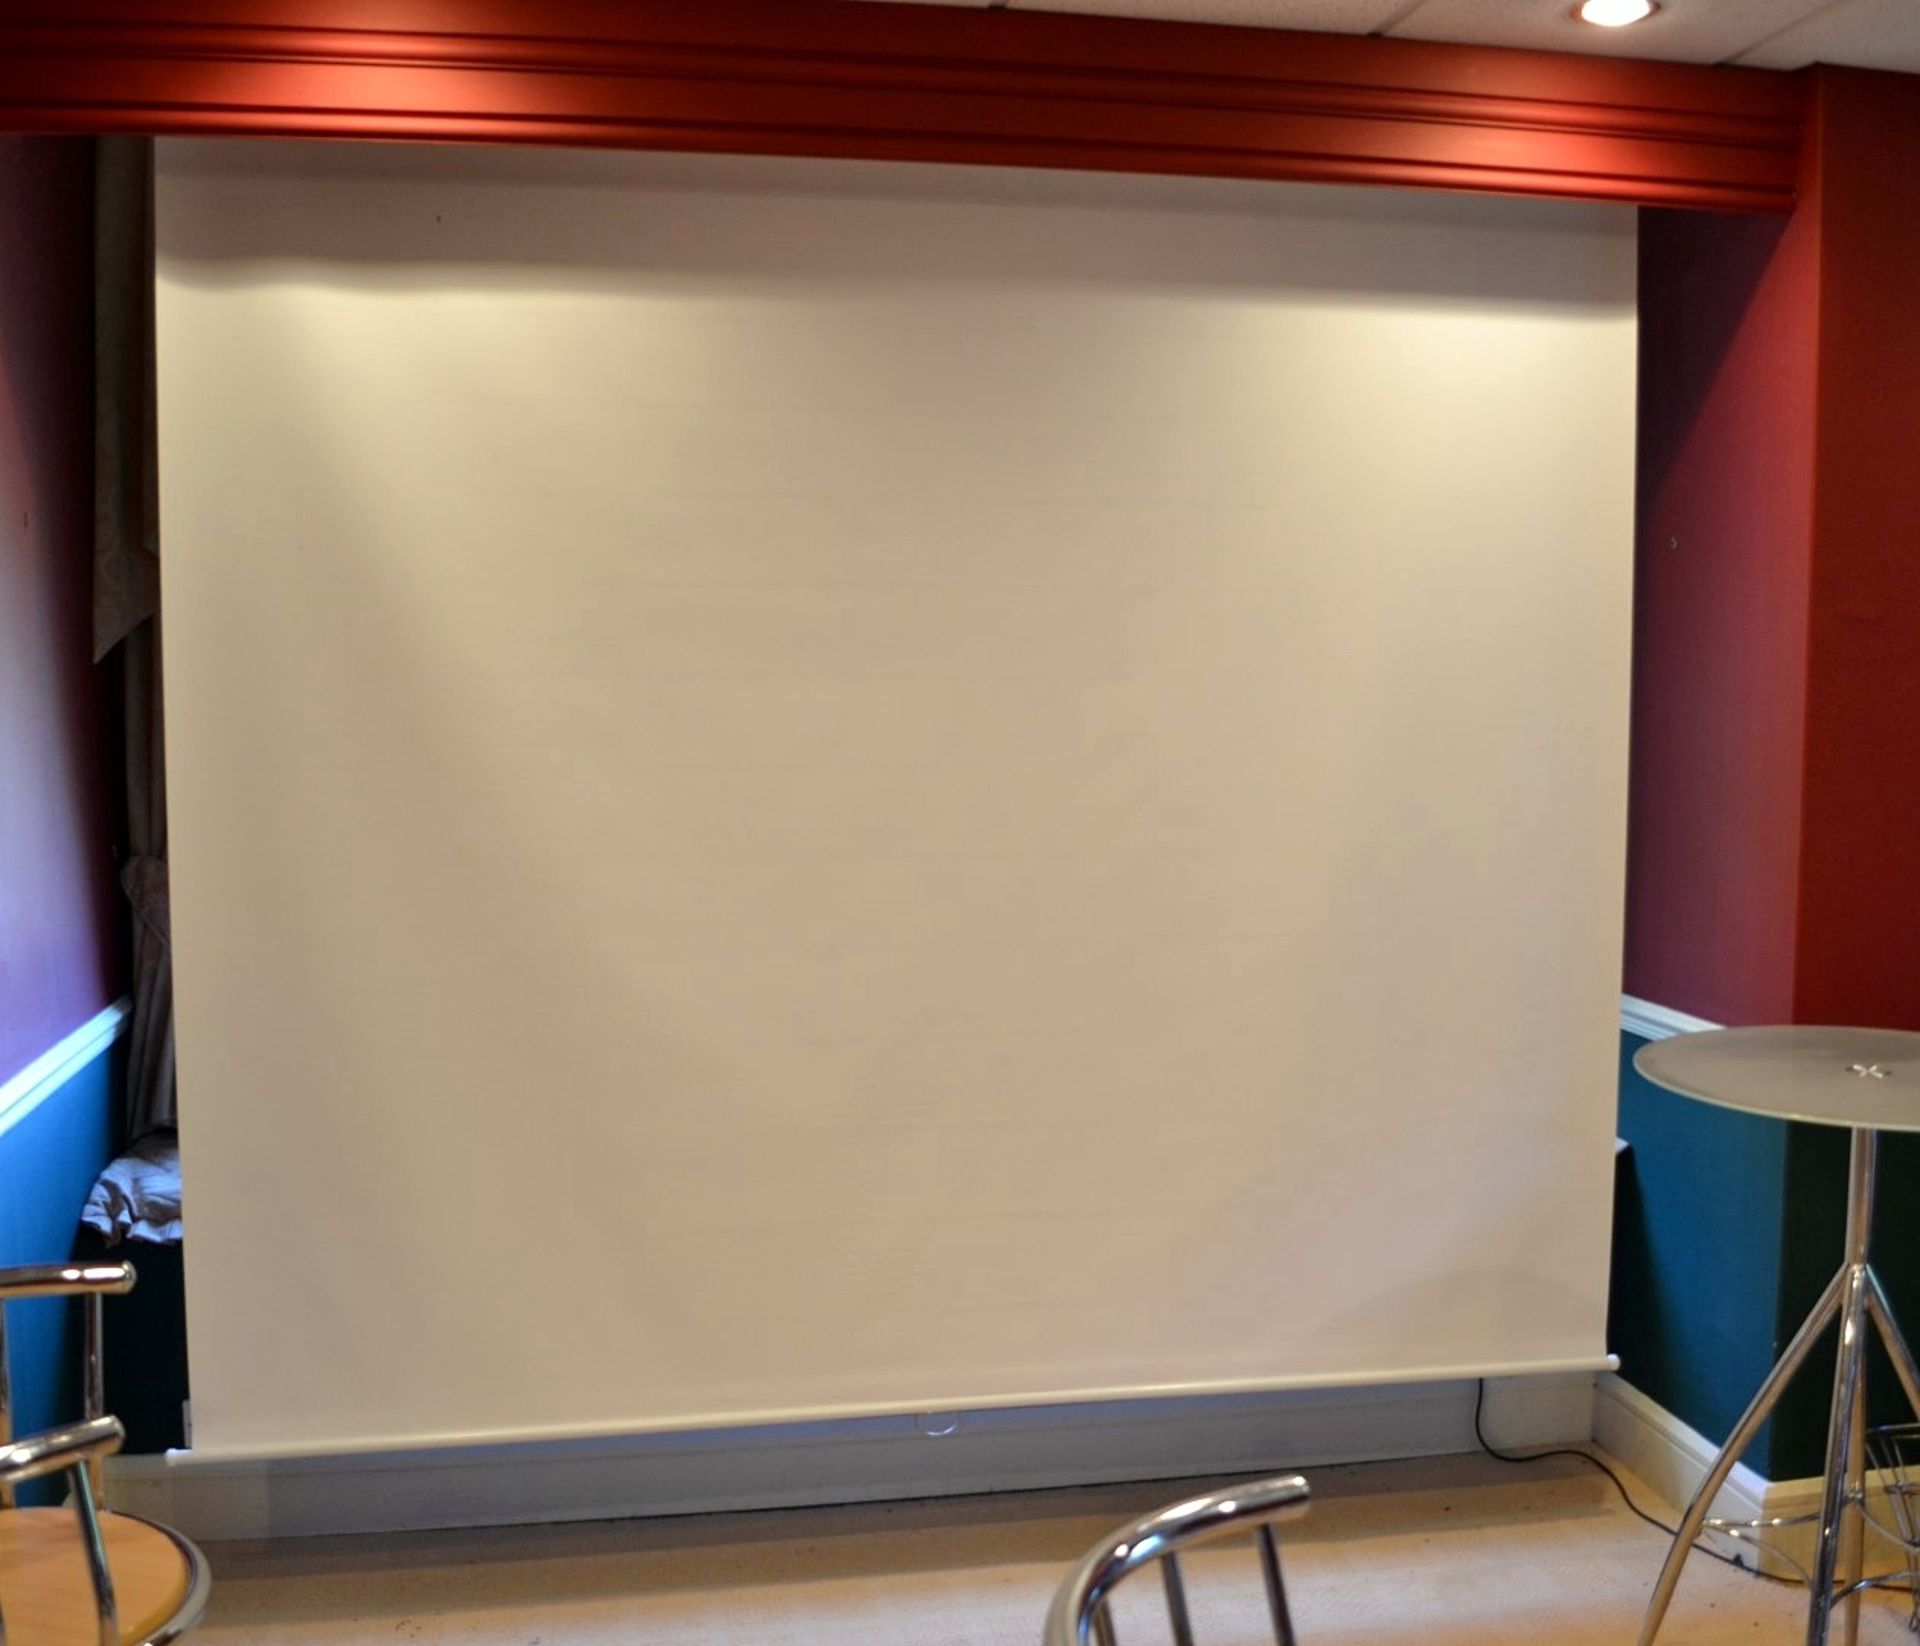 1 x Projector Screen - Preowned In Very Good Condition **More Information & Pictures To Follow**